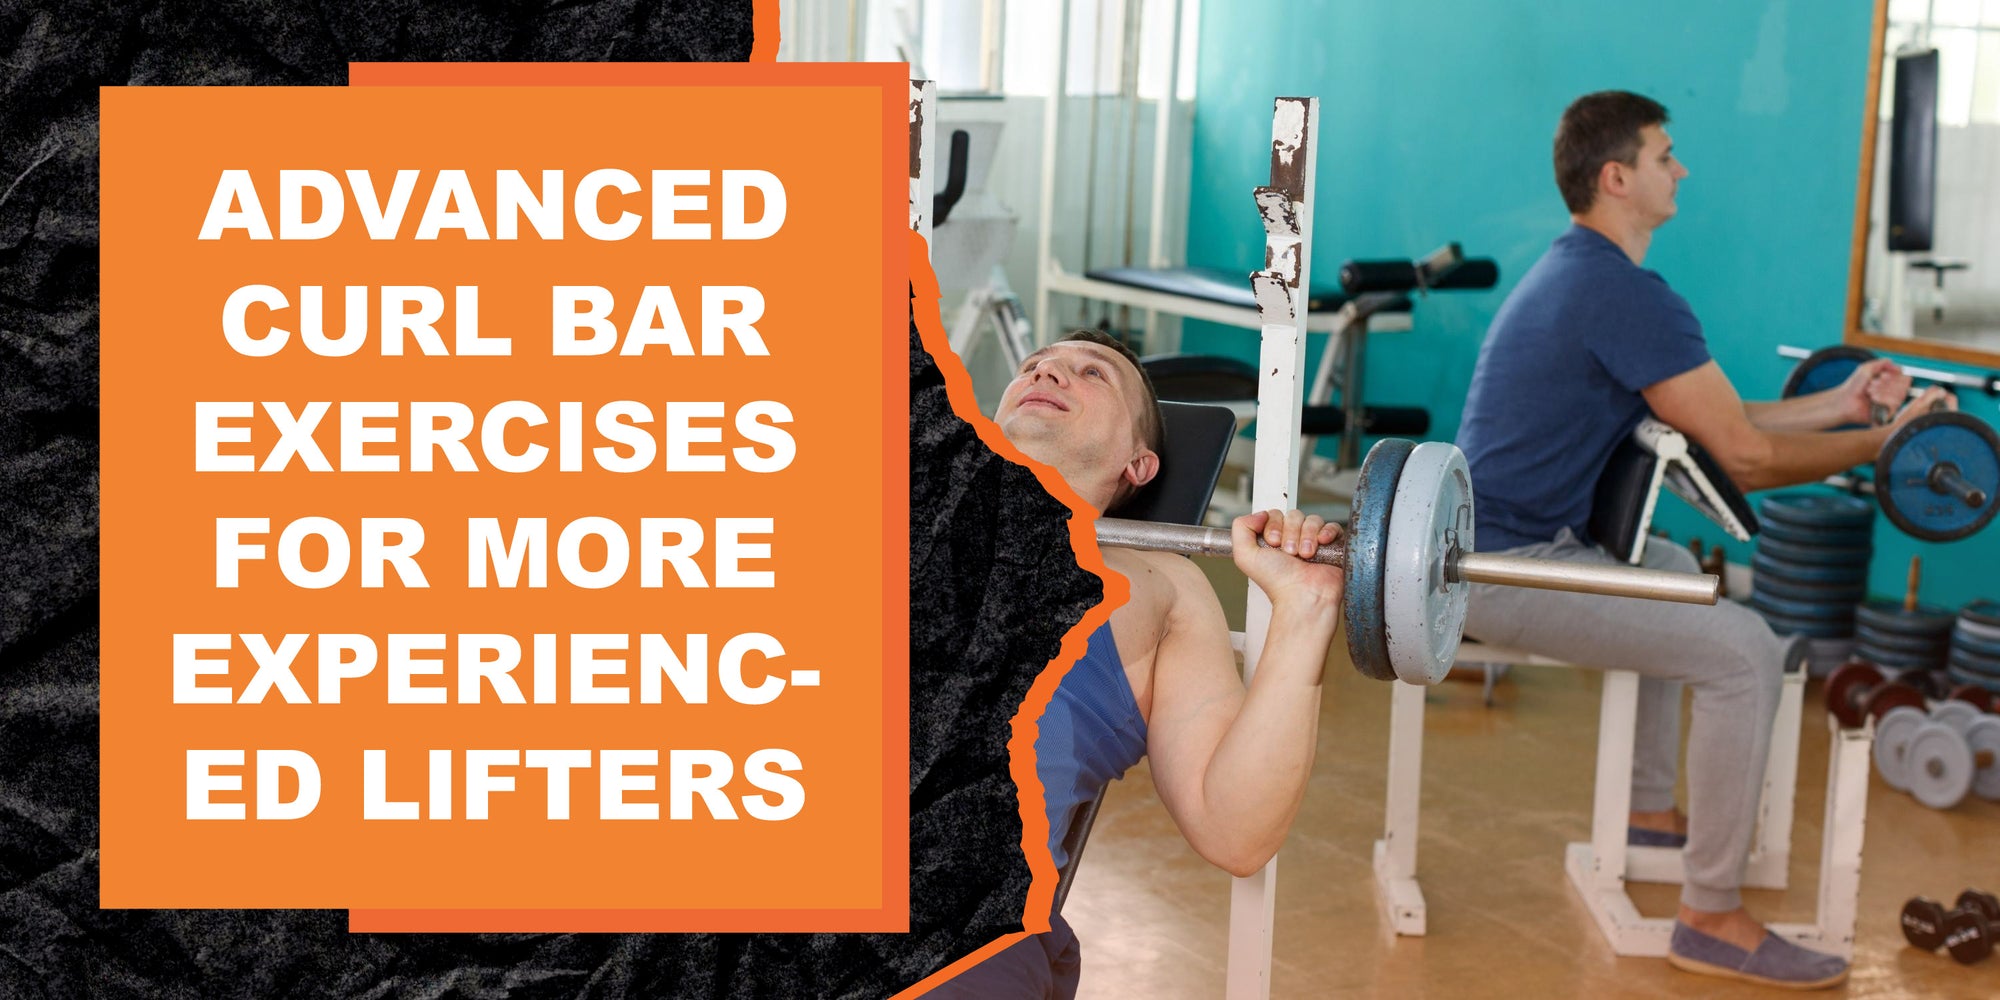 Advanced Curl Bar Exercises for More Experienced Lifters